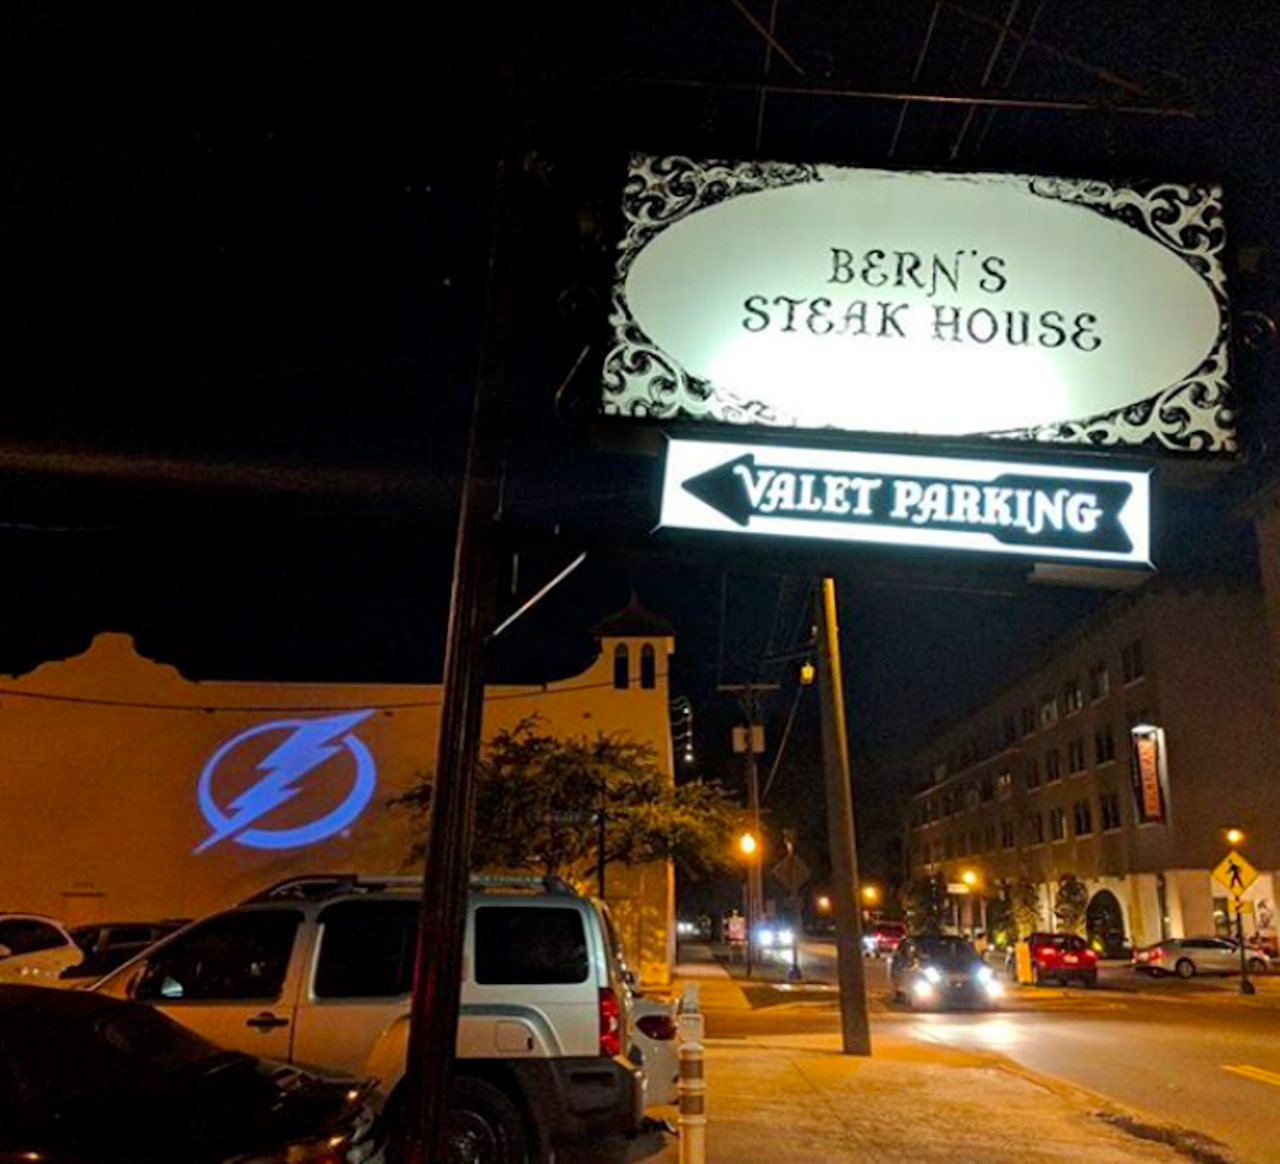 Bern's Steakhouse  
1208 S. Howard Ave., Tampa, 813-251-242421
Definitely a fine dining establishment, you need to make a reservation at this spot, no questions asked - and not the day before. If you need your steak fix, grab a seat at the bar and order a steak sandwich.
Photo credit Bern&#146;s Steakhouse/ Instagram  